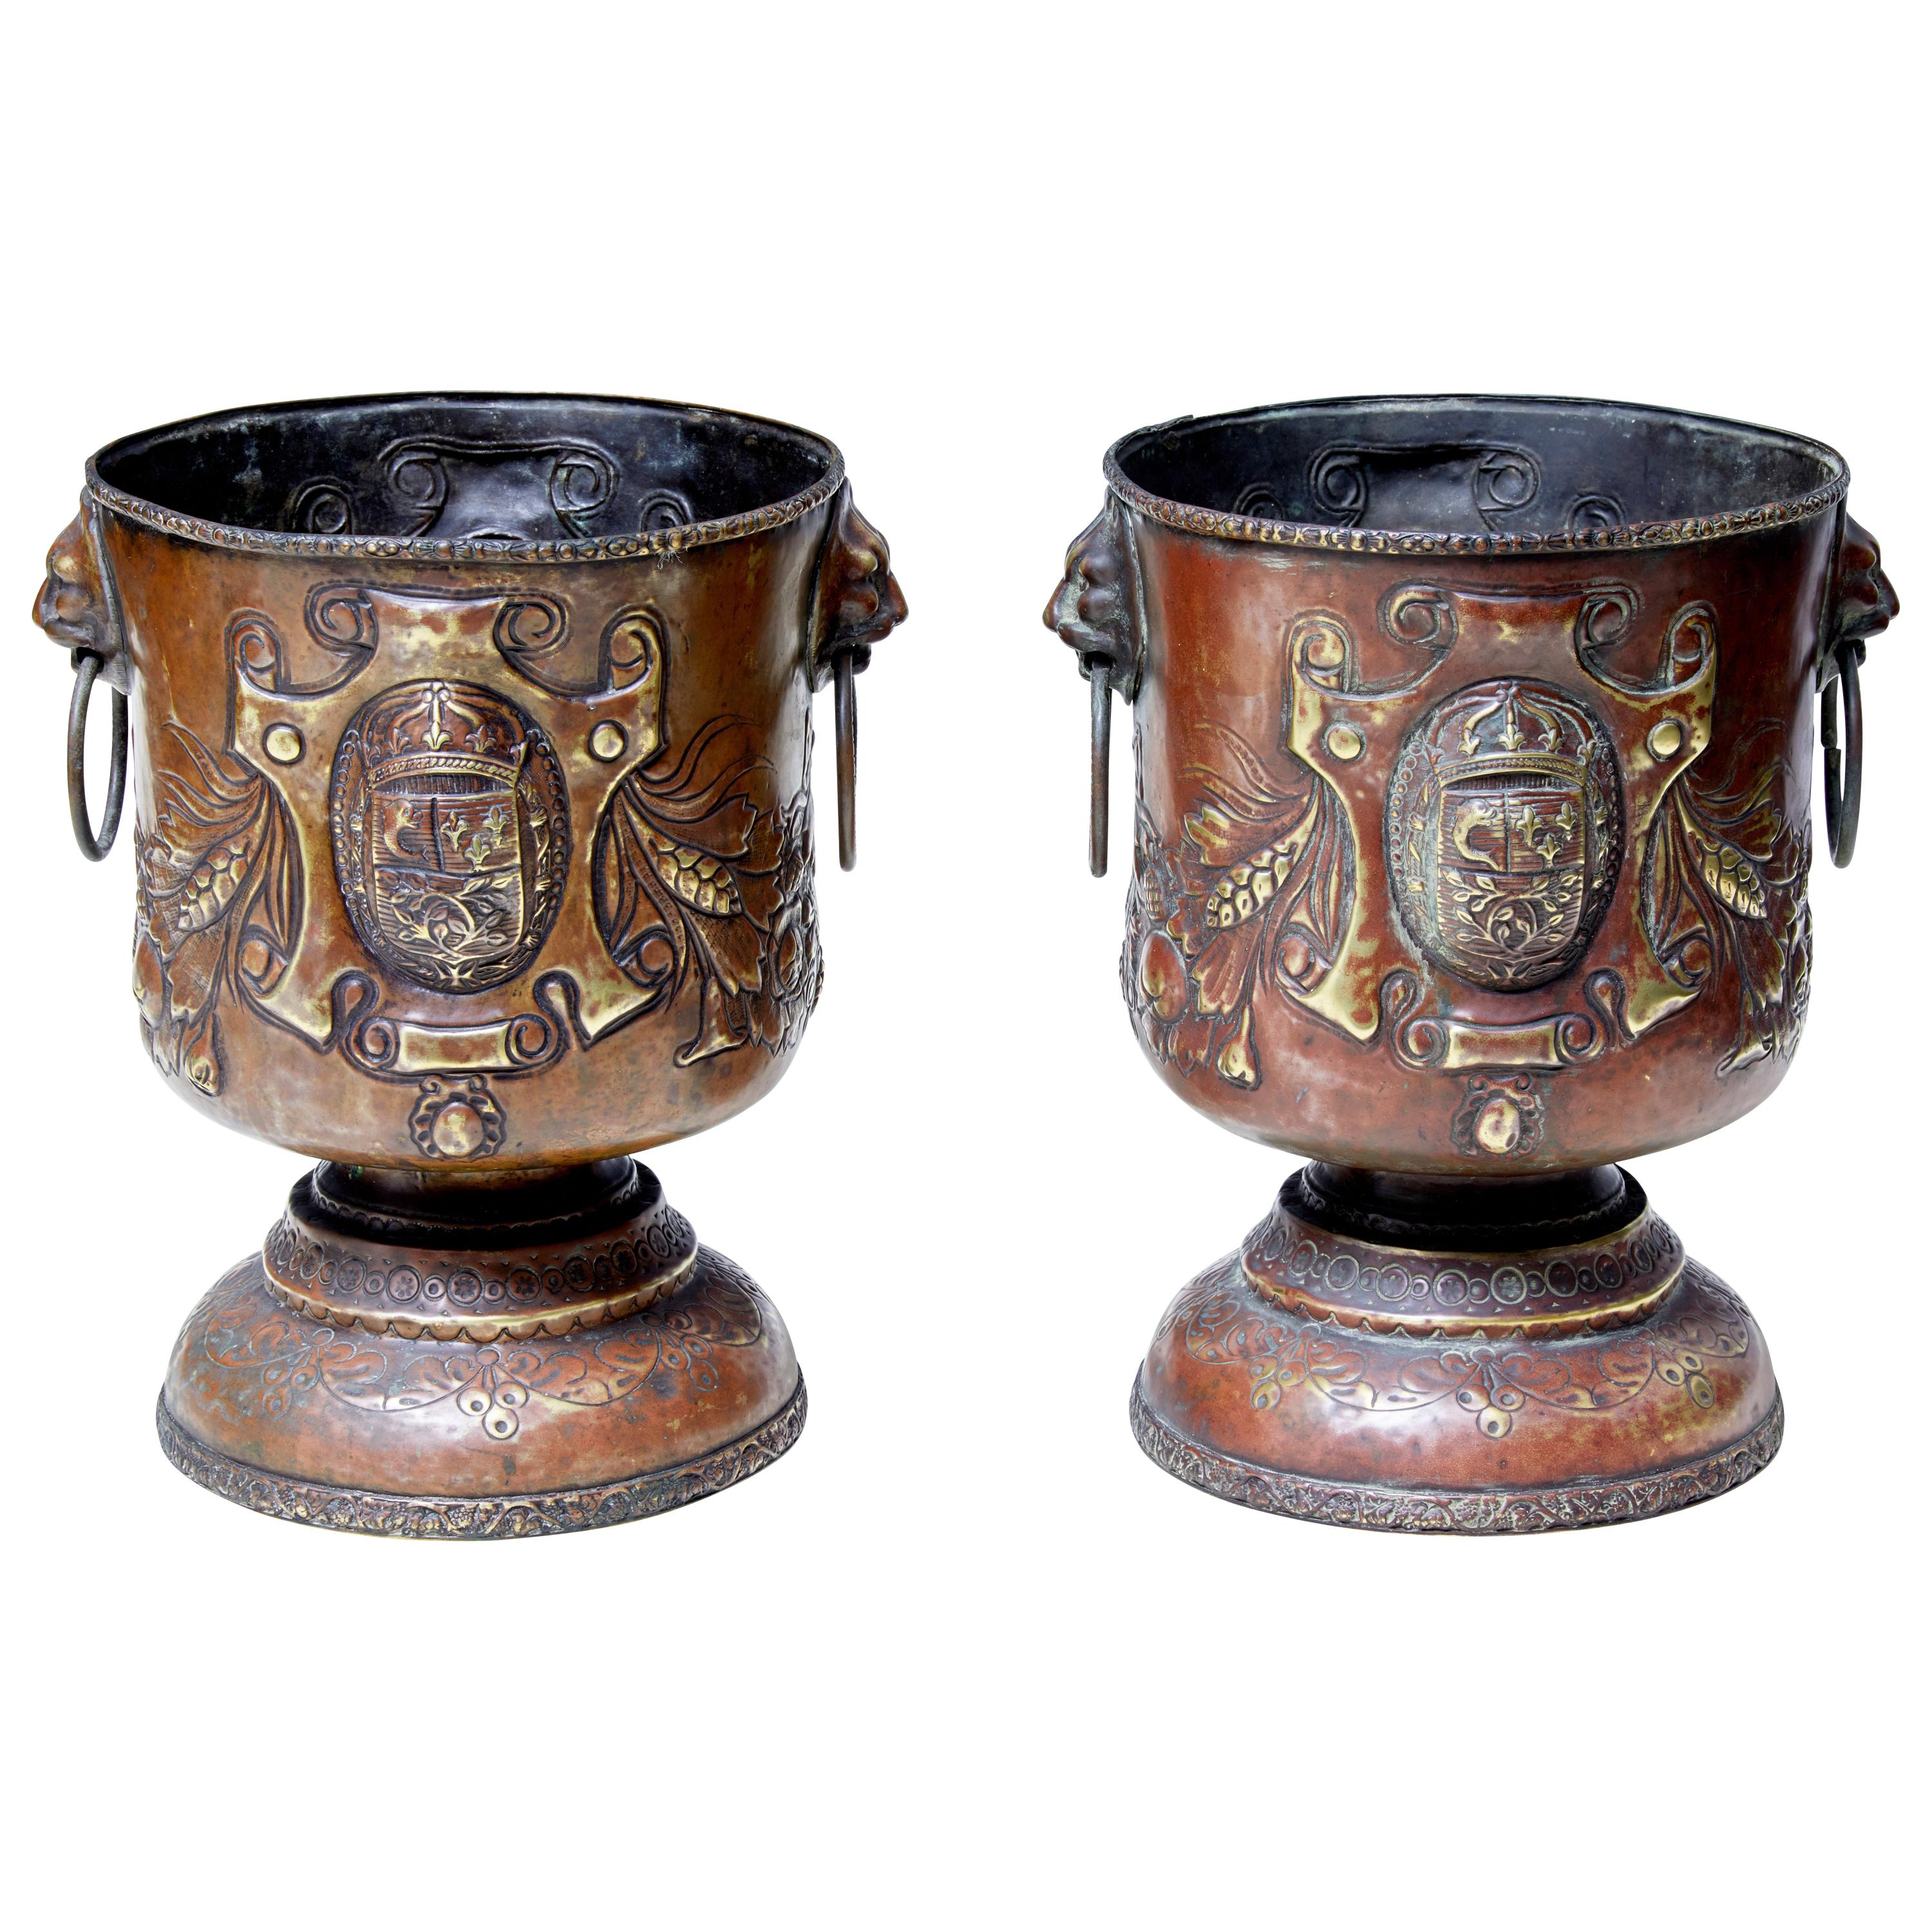 Pair of Late 19th Century Repousse Copper Wine Coolers